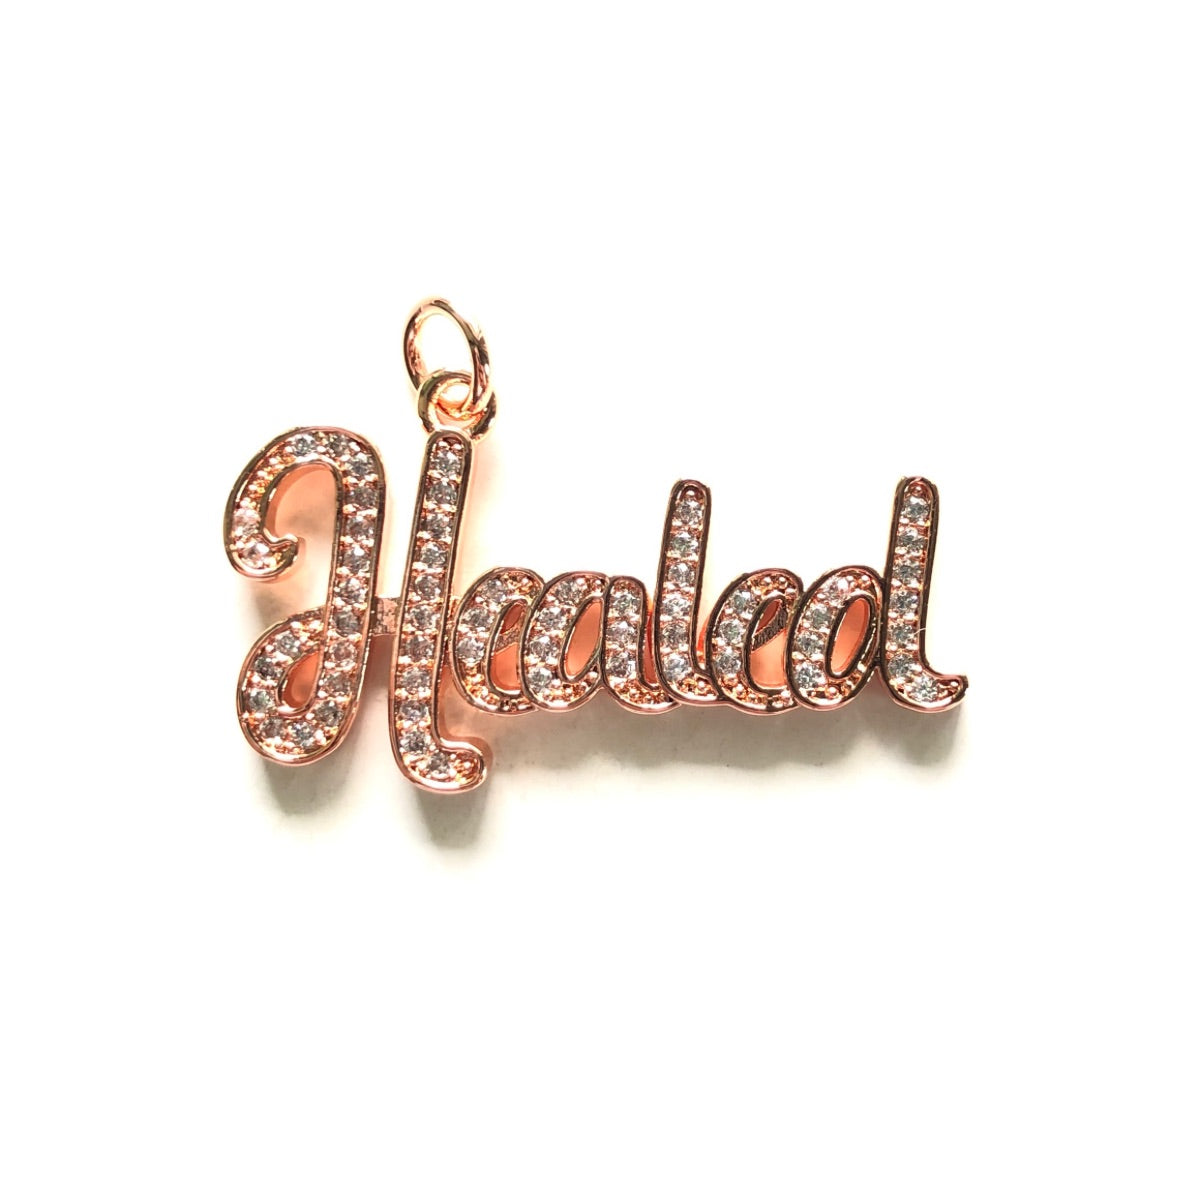 10pcs/lot 35*20mm CZ Pave Healed Word Charms Rose Gold CZ Paved Charms Christian Quotes New Charms Arrivals Words & Quotes Charms Beads Beyond